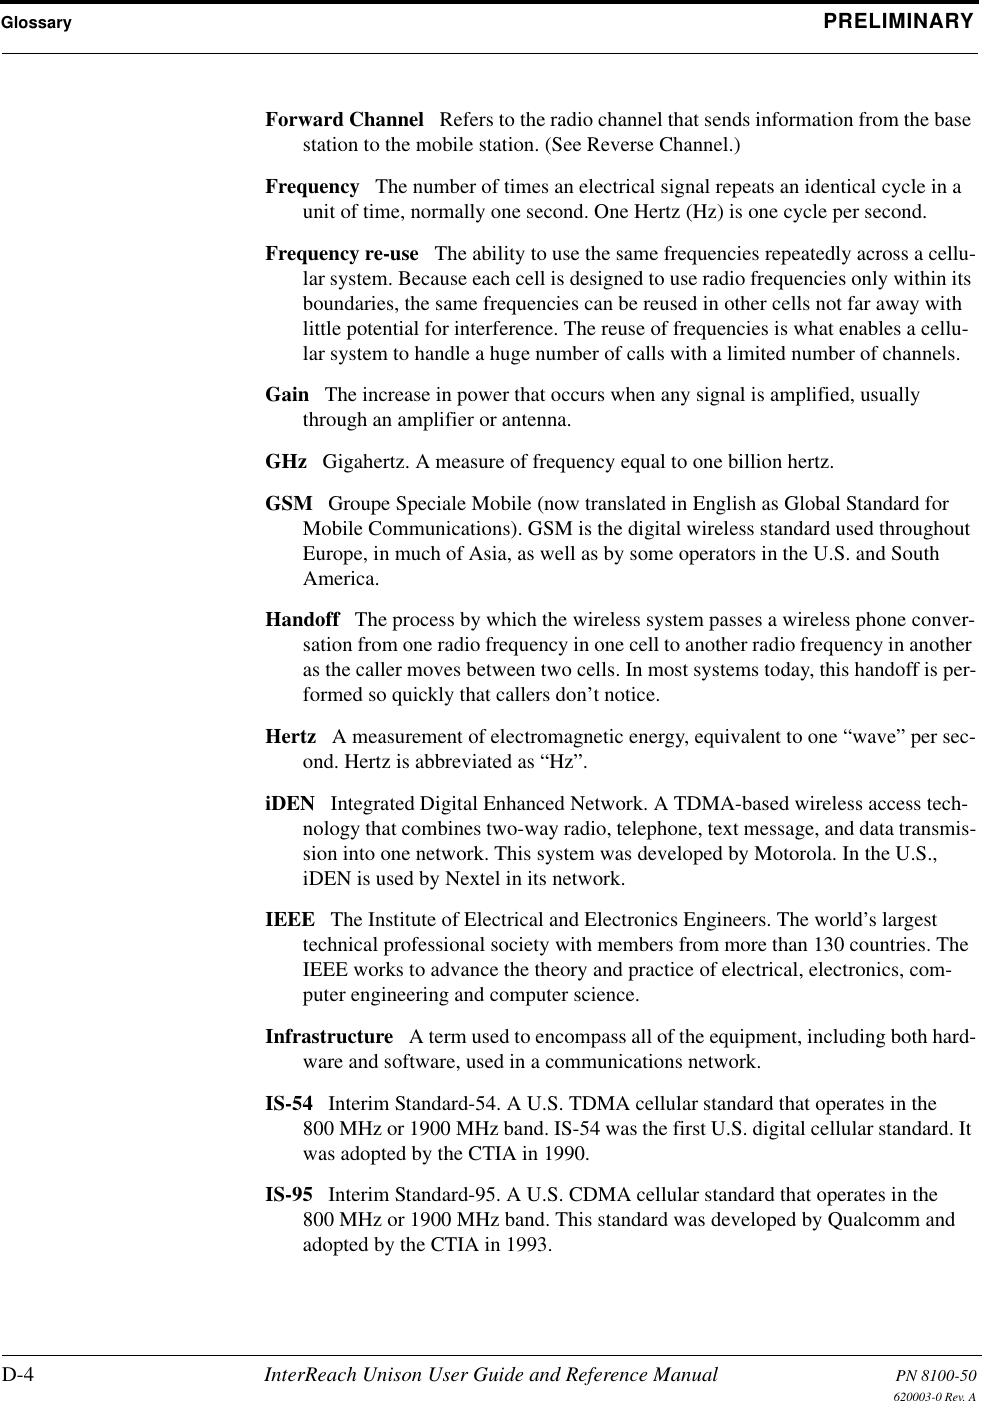 Glossary PRELIMINARYD-4 InterReach Unison User Guide and Reference Manual PN 8100-50620003-0 Rev. AForward Channel Refers to the radio channel that sends information from the base station to the mobile station. (See Reverse Channel.) Frequency The number of times an electrical signal repeats an identical cycle in a unit of time, normally one second. One Hertz (Hz) is one cycle per second. Frequency re-use The ability to use the same frequencies repeatedly across a cellu-lar system. Because each cell is designed to use radio frequencies only within its boundaries, the same frequencies can be reused in other cells not far away with little potential for interference. The reuse of frequencies is what enables a cellu-lar system to handle a huge number of calls with a limited number of channels. Gain The increase in power that occurs when any signal is amplified, usually through an amplifier or antenna. GHz Gigahertz. A measure of frequency equal to one billion hertz. GSM Groupe Speciale Mobile (now translated in English as Global Standard for Mobile Communications). GSM is the digital wireless standard used throughout Europe, in much of Asia, as well as by some operators in the U.S. and South America. Handoff The process by which the wireless system passes a wireless phone conver-sation from one radio frequency in one cell to another radio frequency in another as the caller moves between two cells. In most systems today, this handoff is per-formed so quickly that callers don’t notice. Hertz A measurement of electromagnetic energy, equivalent to one “wave” per sec-ond. Hertz is abbreviated as “Hz”. iDEN Integrated Digital Enhanced Network. A TDMA-based wireless access tech-nology that combines two-way radio, telephone, text message, and data transmis-sion into one network. This system was developed by Motorola. In the U.S., iDEN is used by Nextel in its network. IEEE The Institute of Electrical and Electronics Engineers. The world’s largest technical professional society with members from more than 130 countries. The IEEE works to advance the theory and practice of electrical, electronics, com-puter engineering and computer science. Infrastructure A term used to encompass all of the equipment, including both hard-ware and software, used in a communications network. IS-54 Interim Standard-54. A U.S. TDMA cellular standard that operates in the 800 MHz or 1900 MHz band. IS-54 was the first U.S. digital cellular standard. It was adopted by the CTIA in 1990. IS-95 Interim Standard-95. A U.S. CDMA cellular standard that operates in the 800 MHz or 1900 MHz band. This standard was developed by Qualcomm and adopted by the CTIA in 1993. 